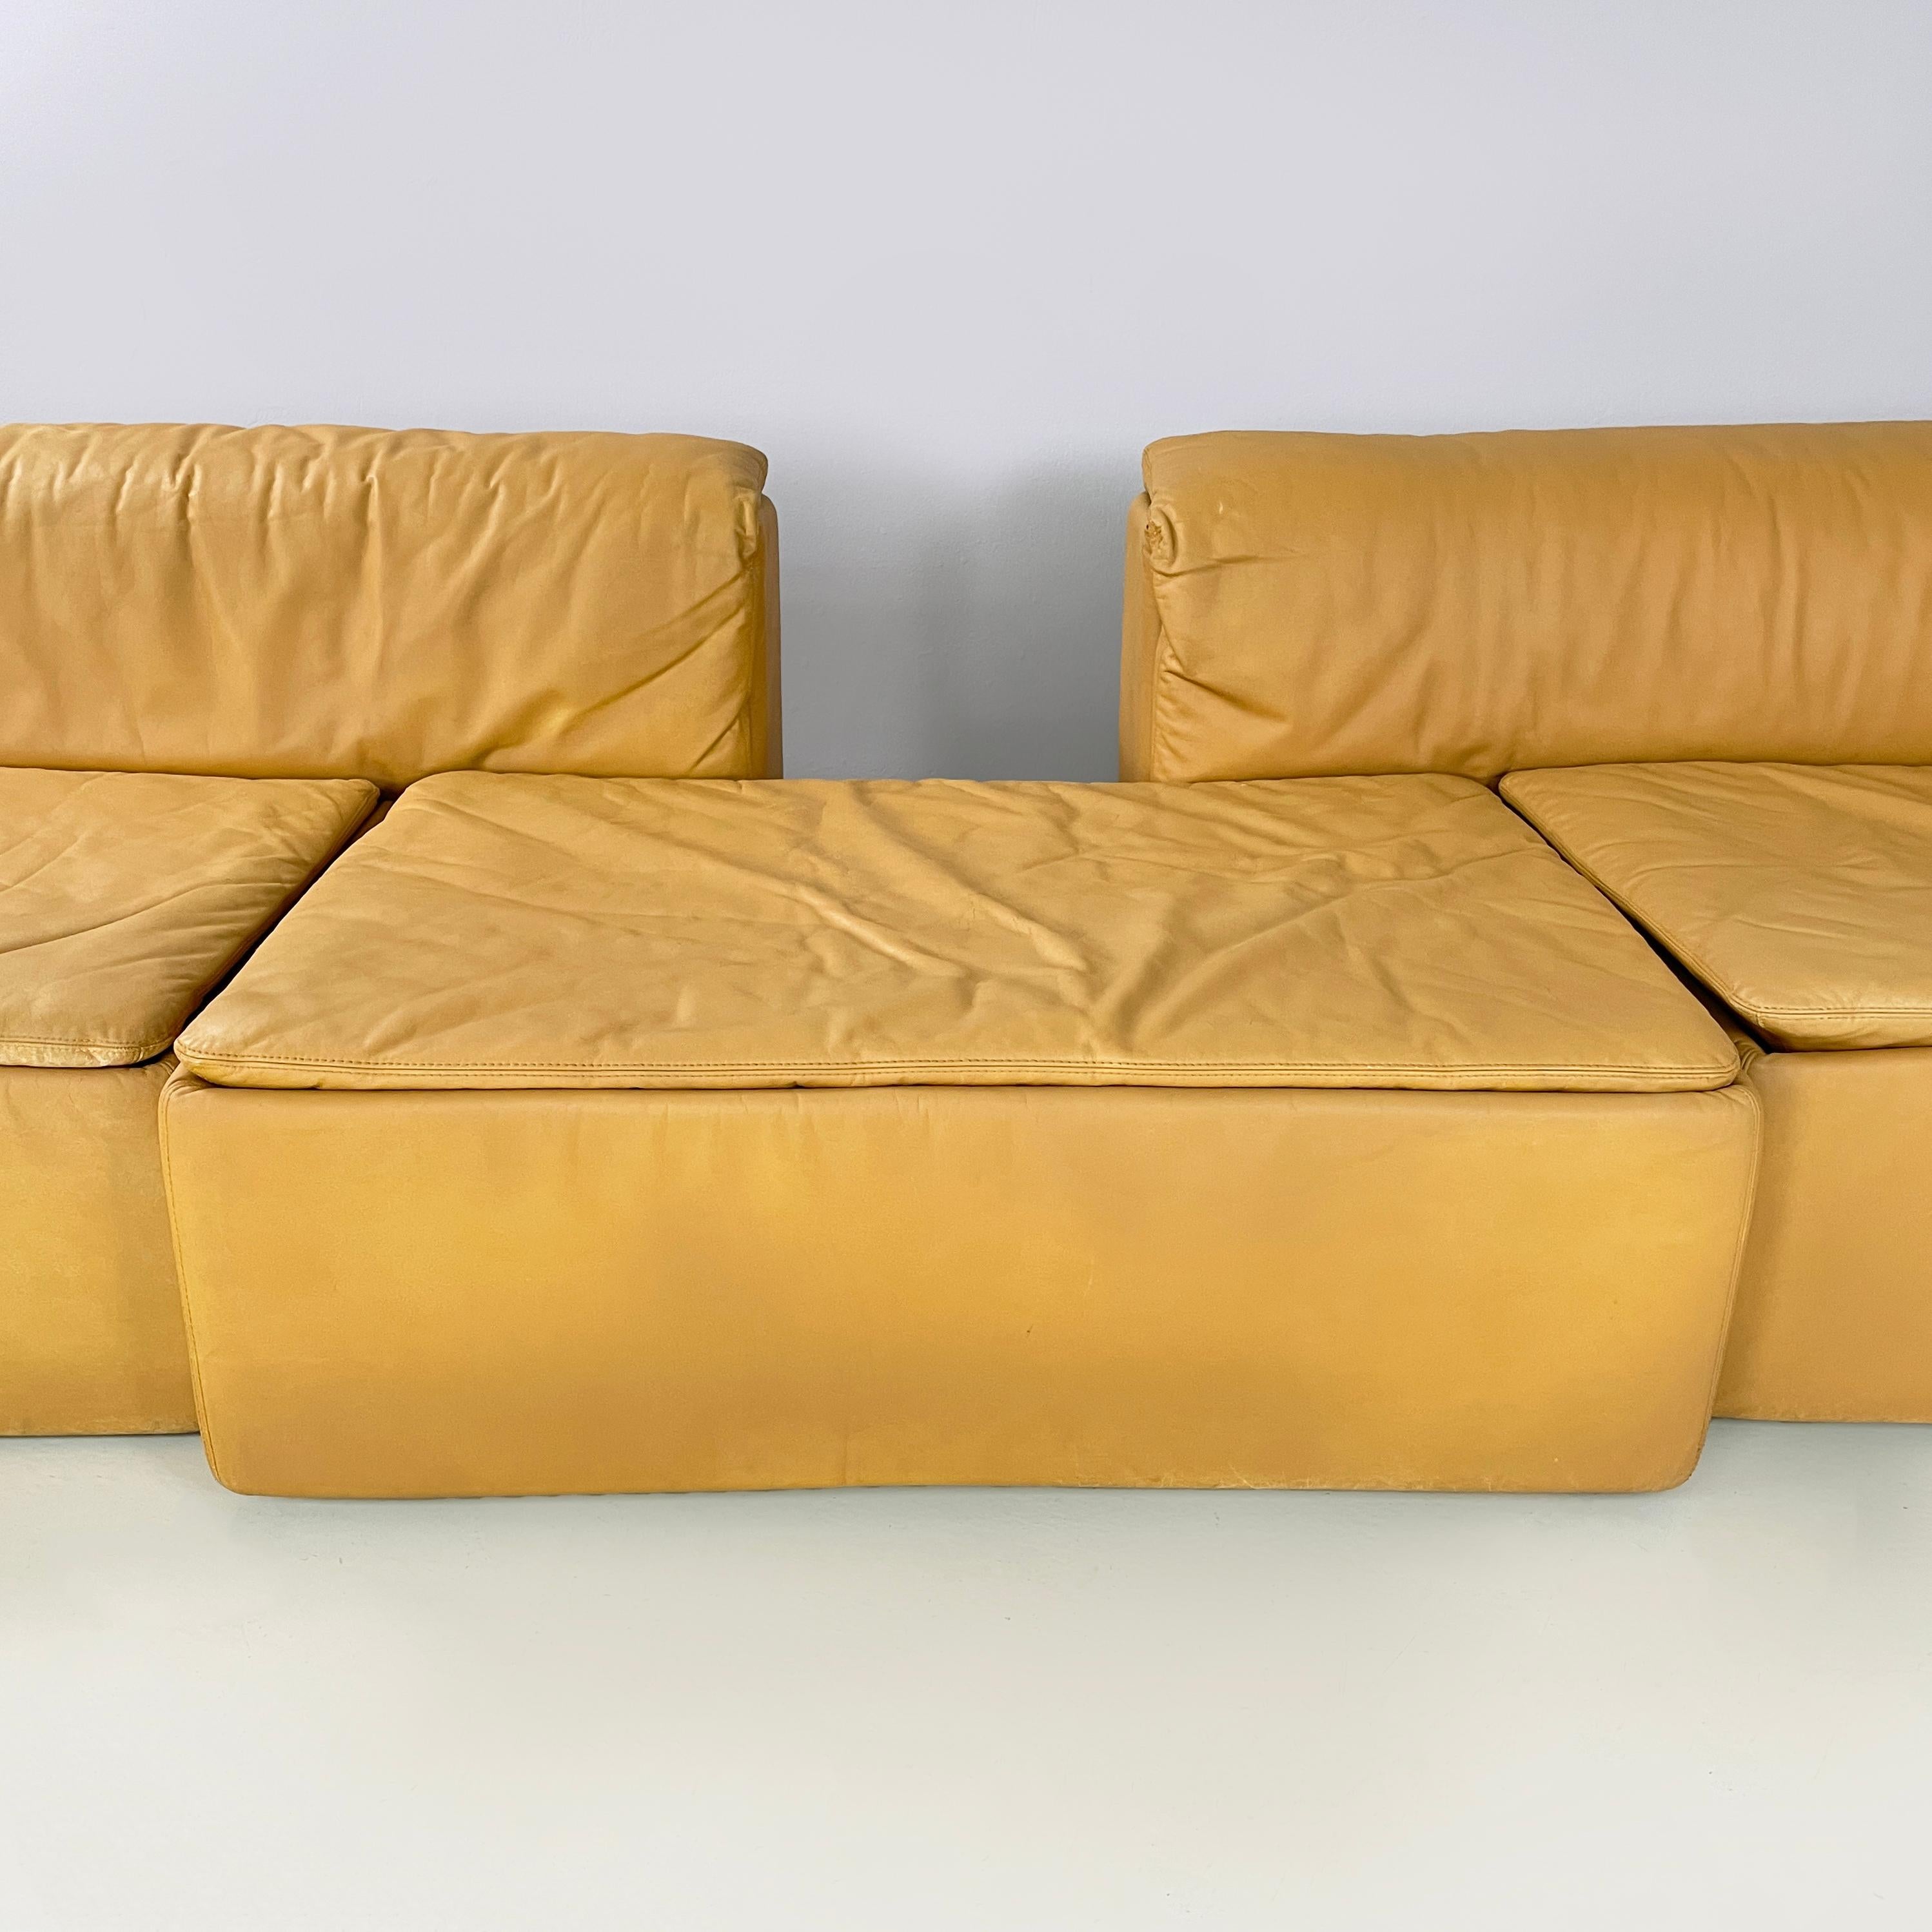 Italian modern Brown leather modular sofa Paione by Salocchi for Sormani, 1970s For Sale 5